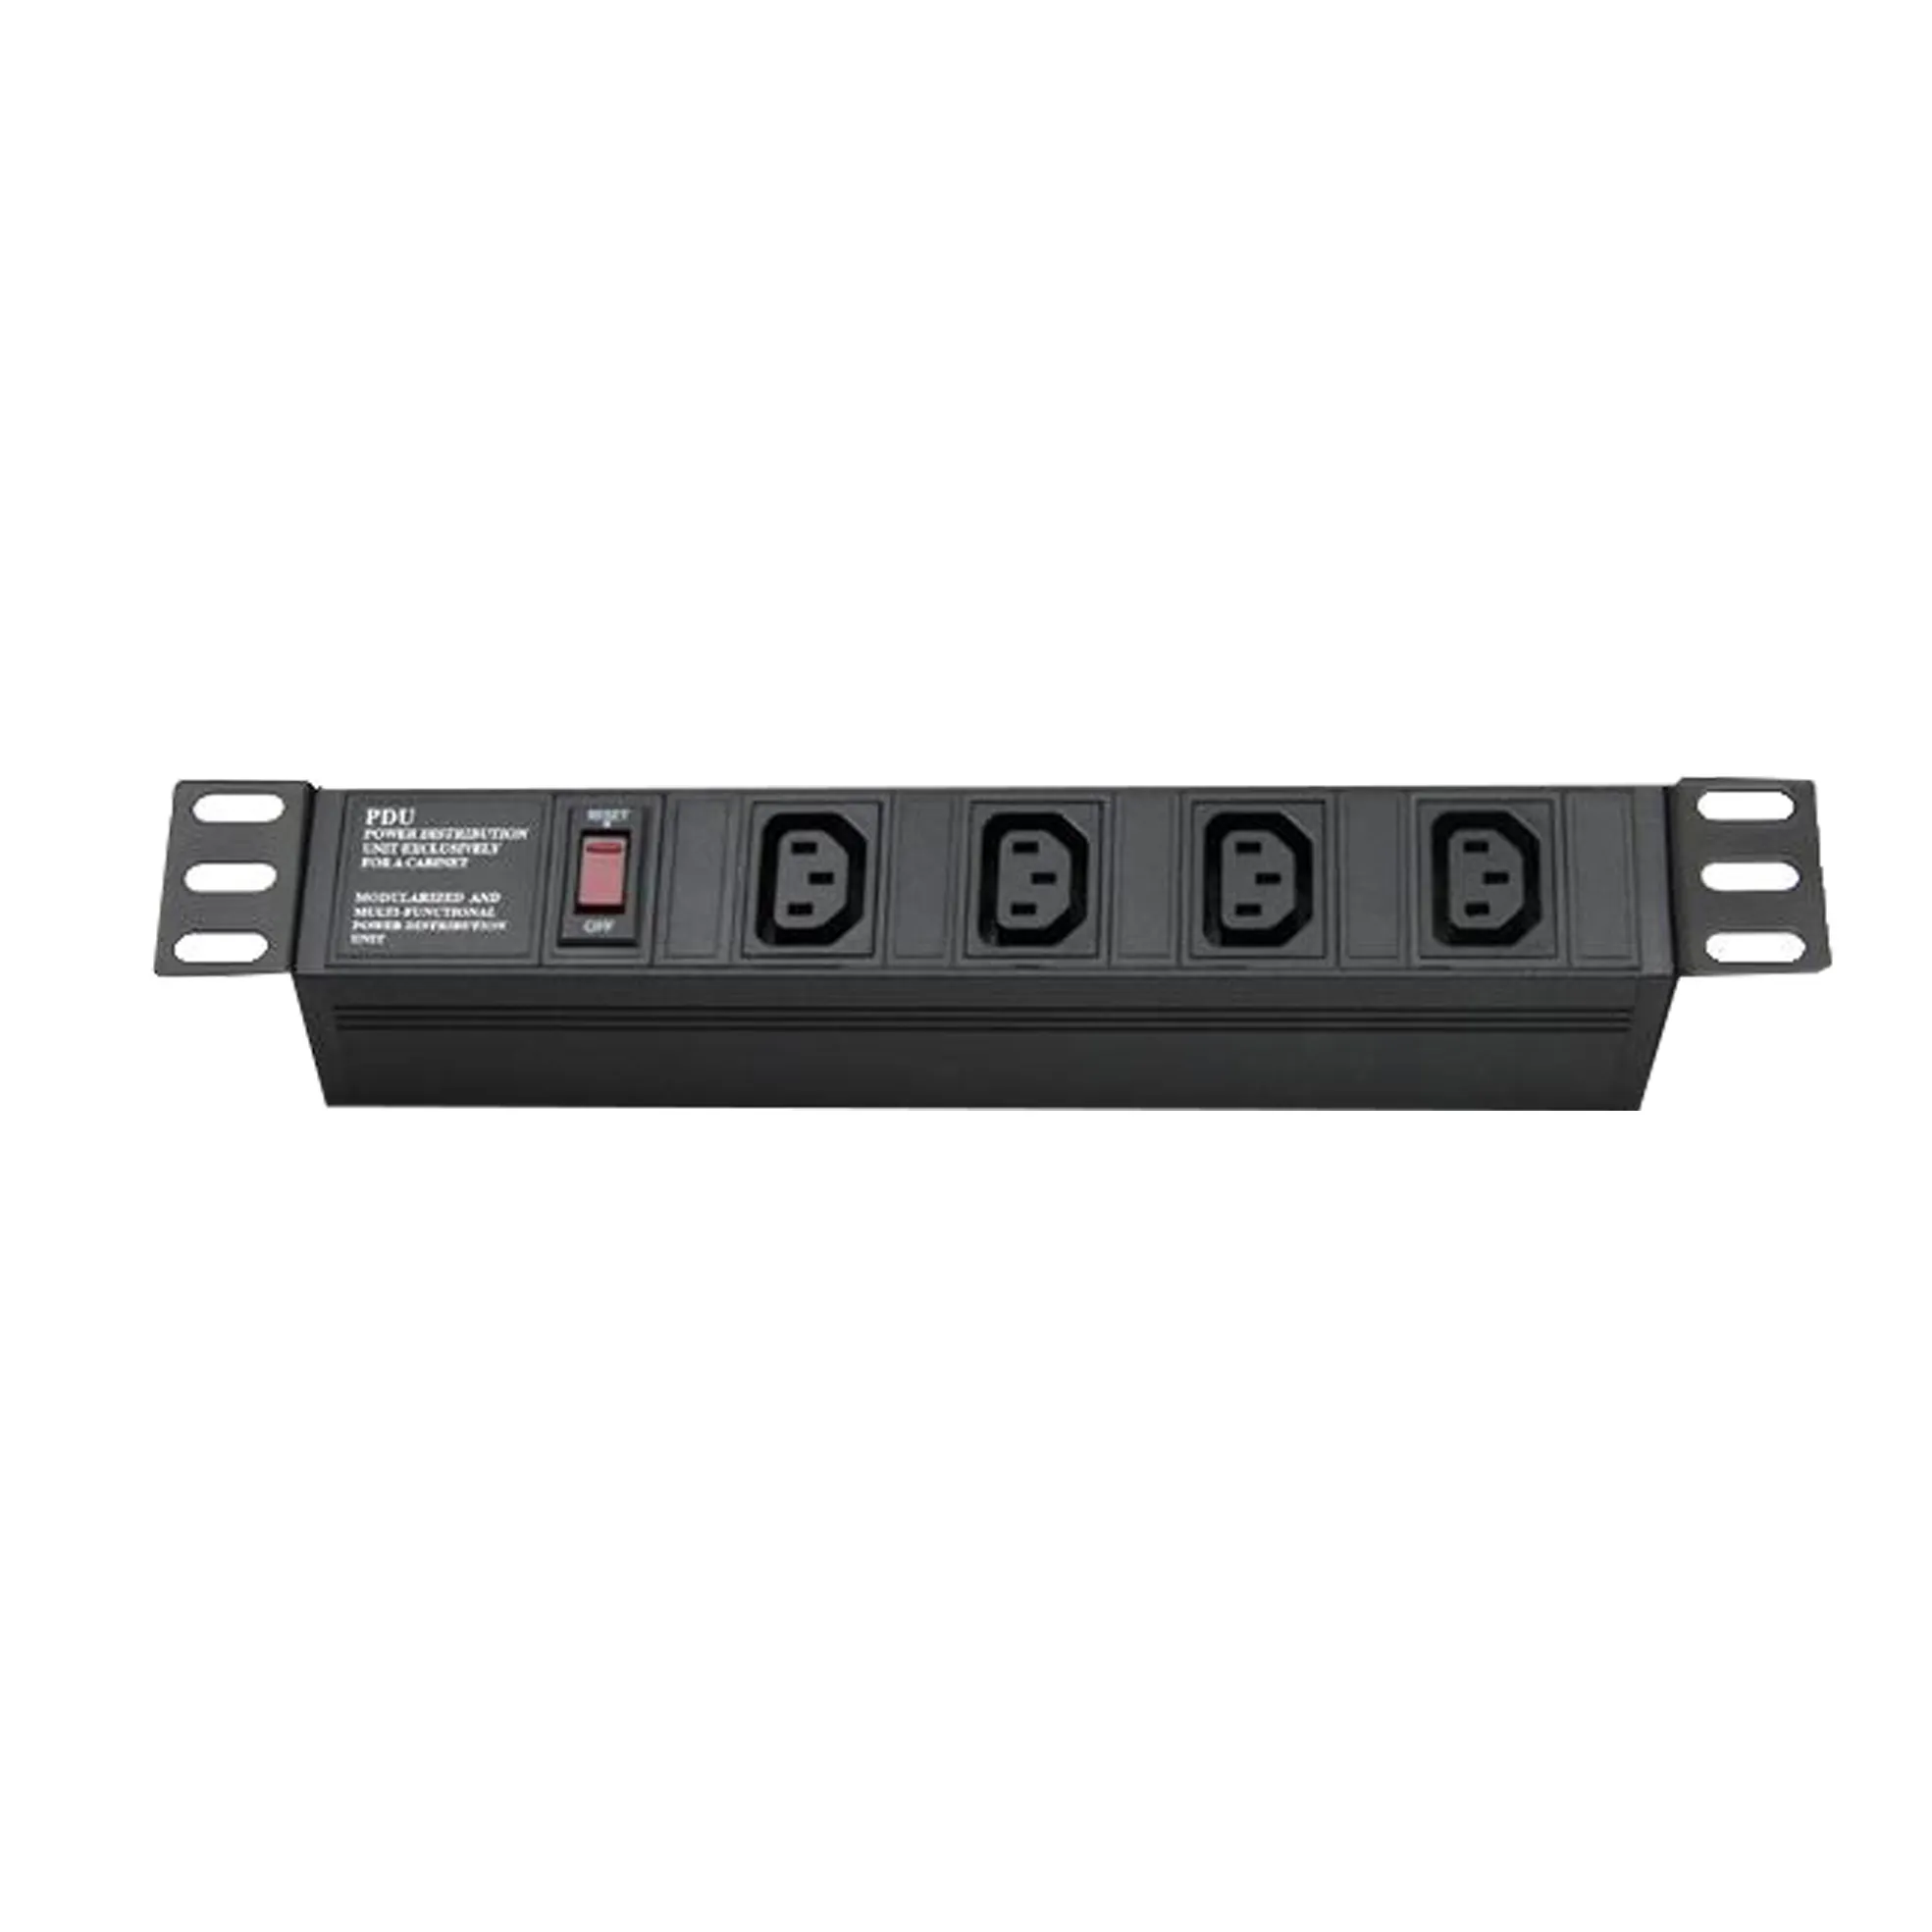 6/8/10/12 Ways IEC Basic PDU with Surge Protection Overload Switch